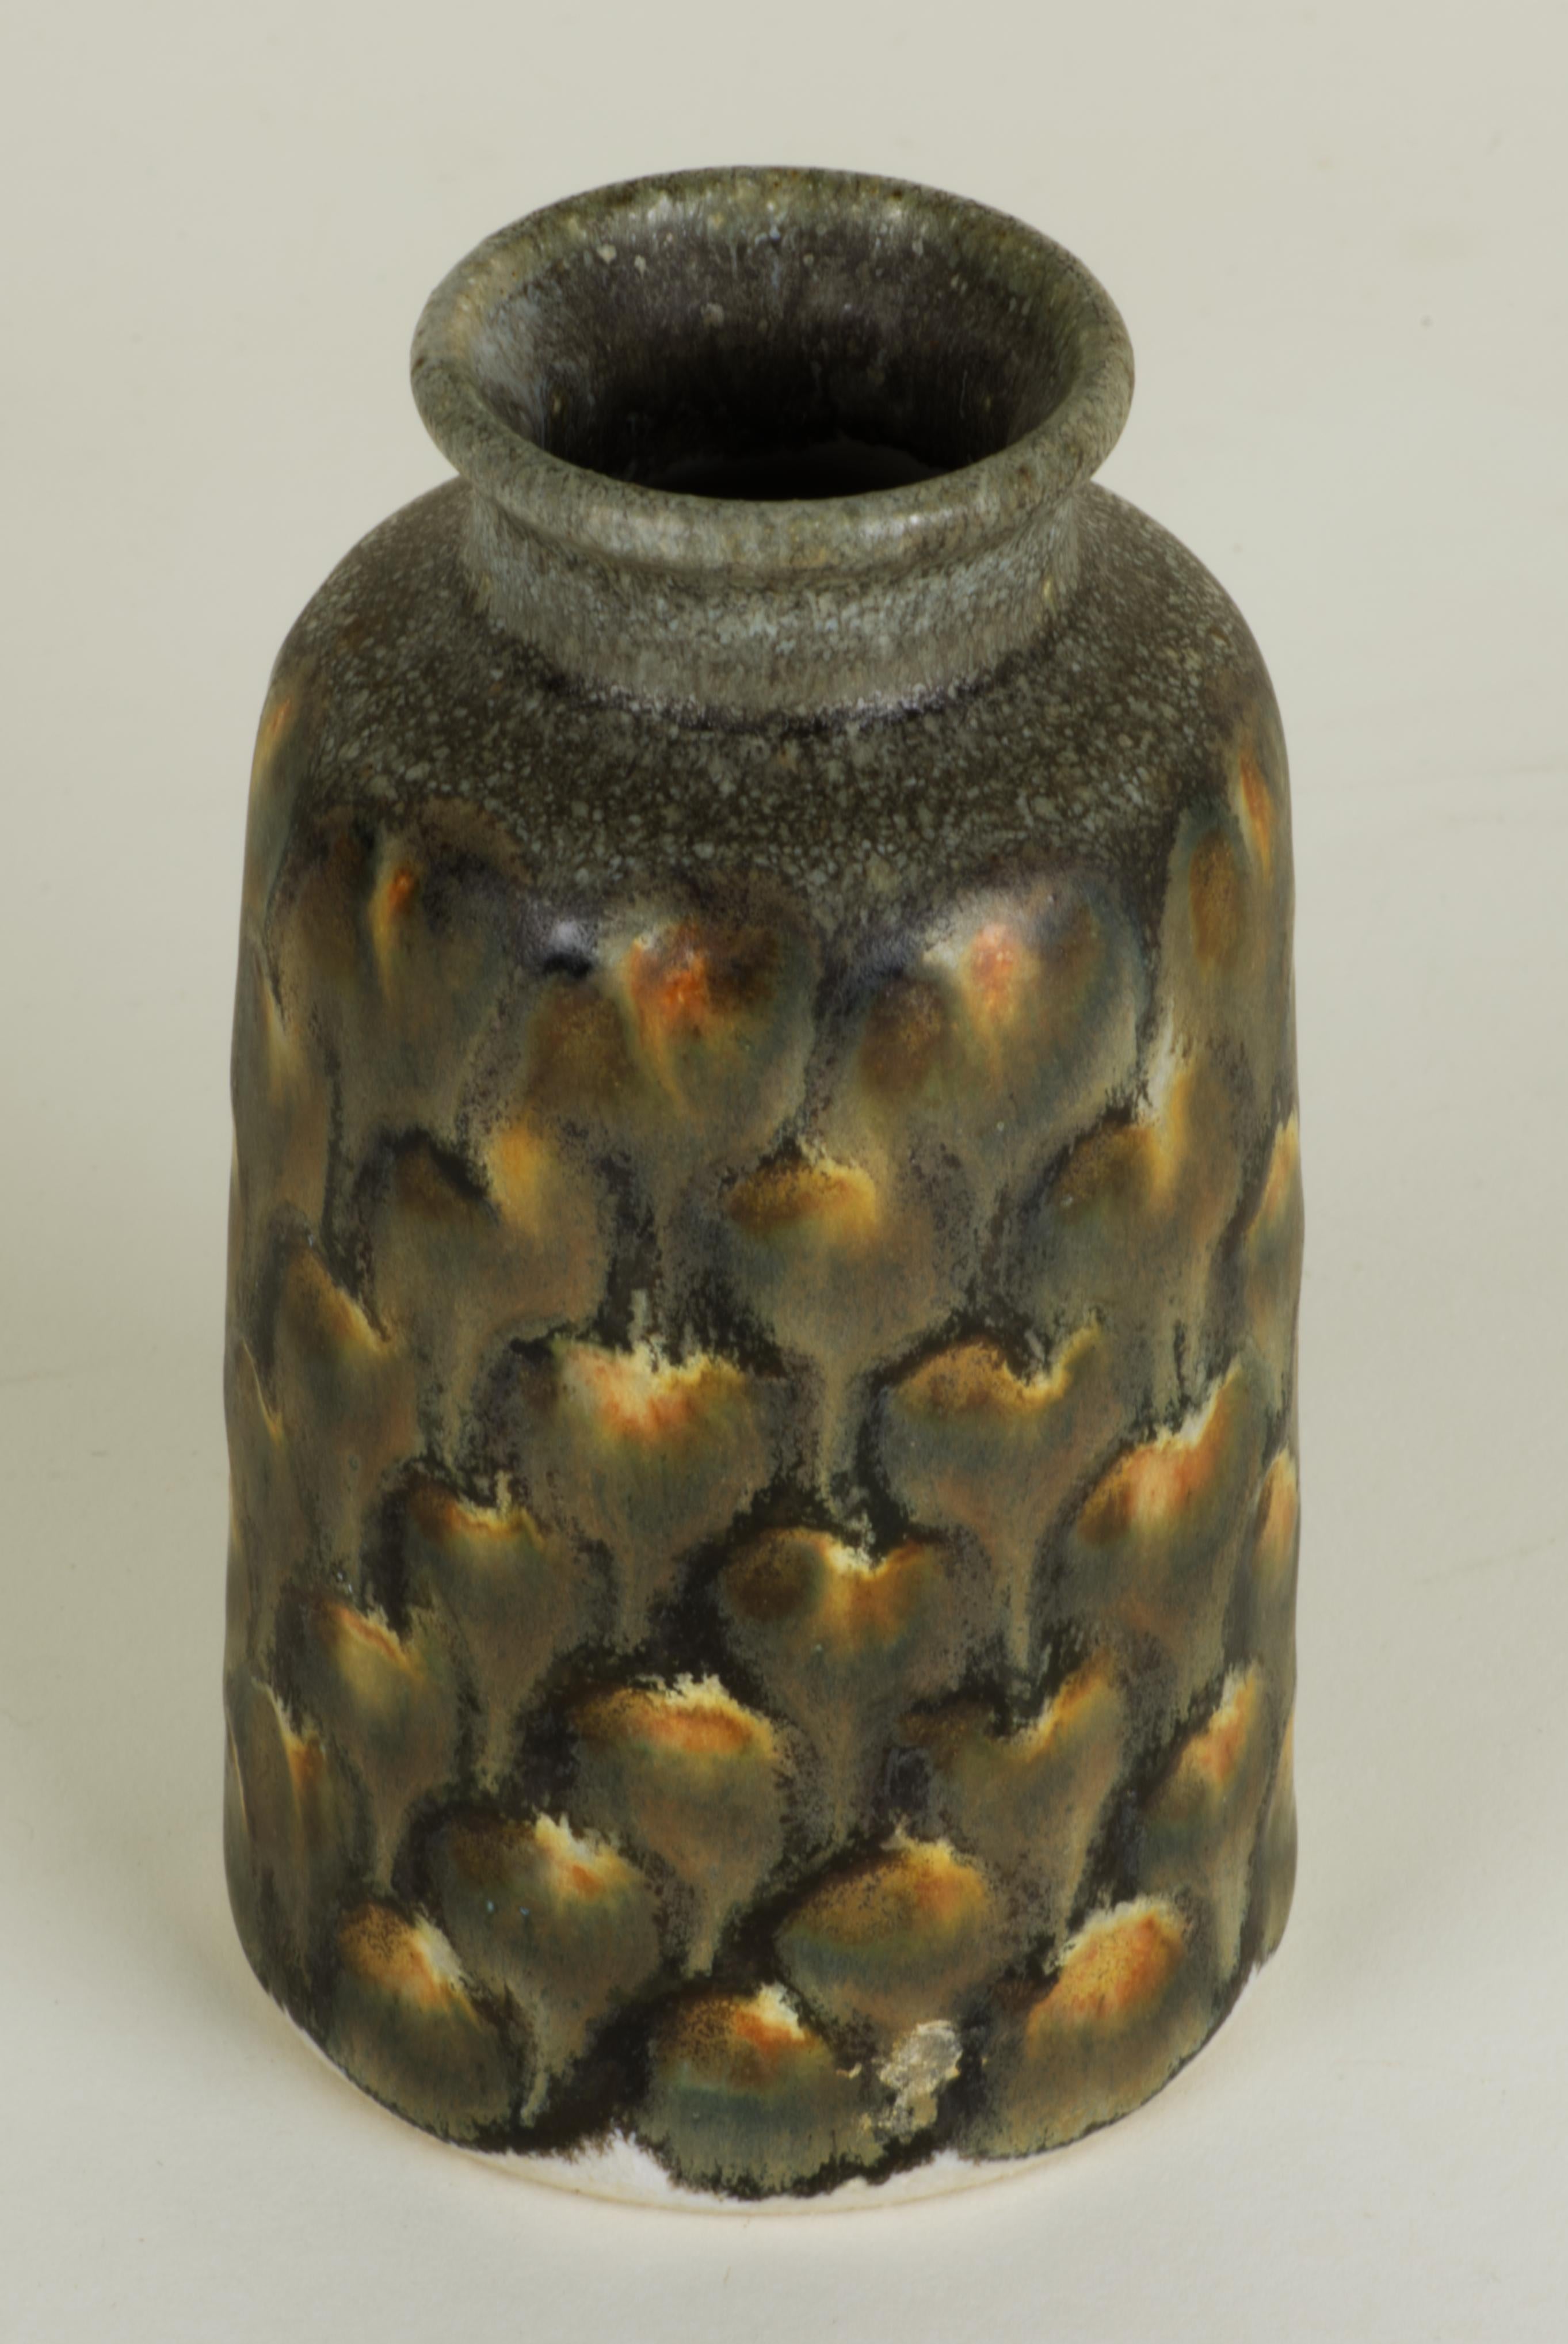  Small glazed stoneware vase is made by North Carolina's Outer Banks studio of Jim Fineman. It is decorated in his characteristic Peacock glaze done in warm brown and yellow palette, giving the vase an organic, earth toned appearance; the bottom is